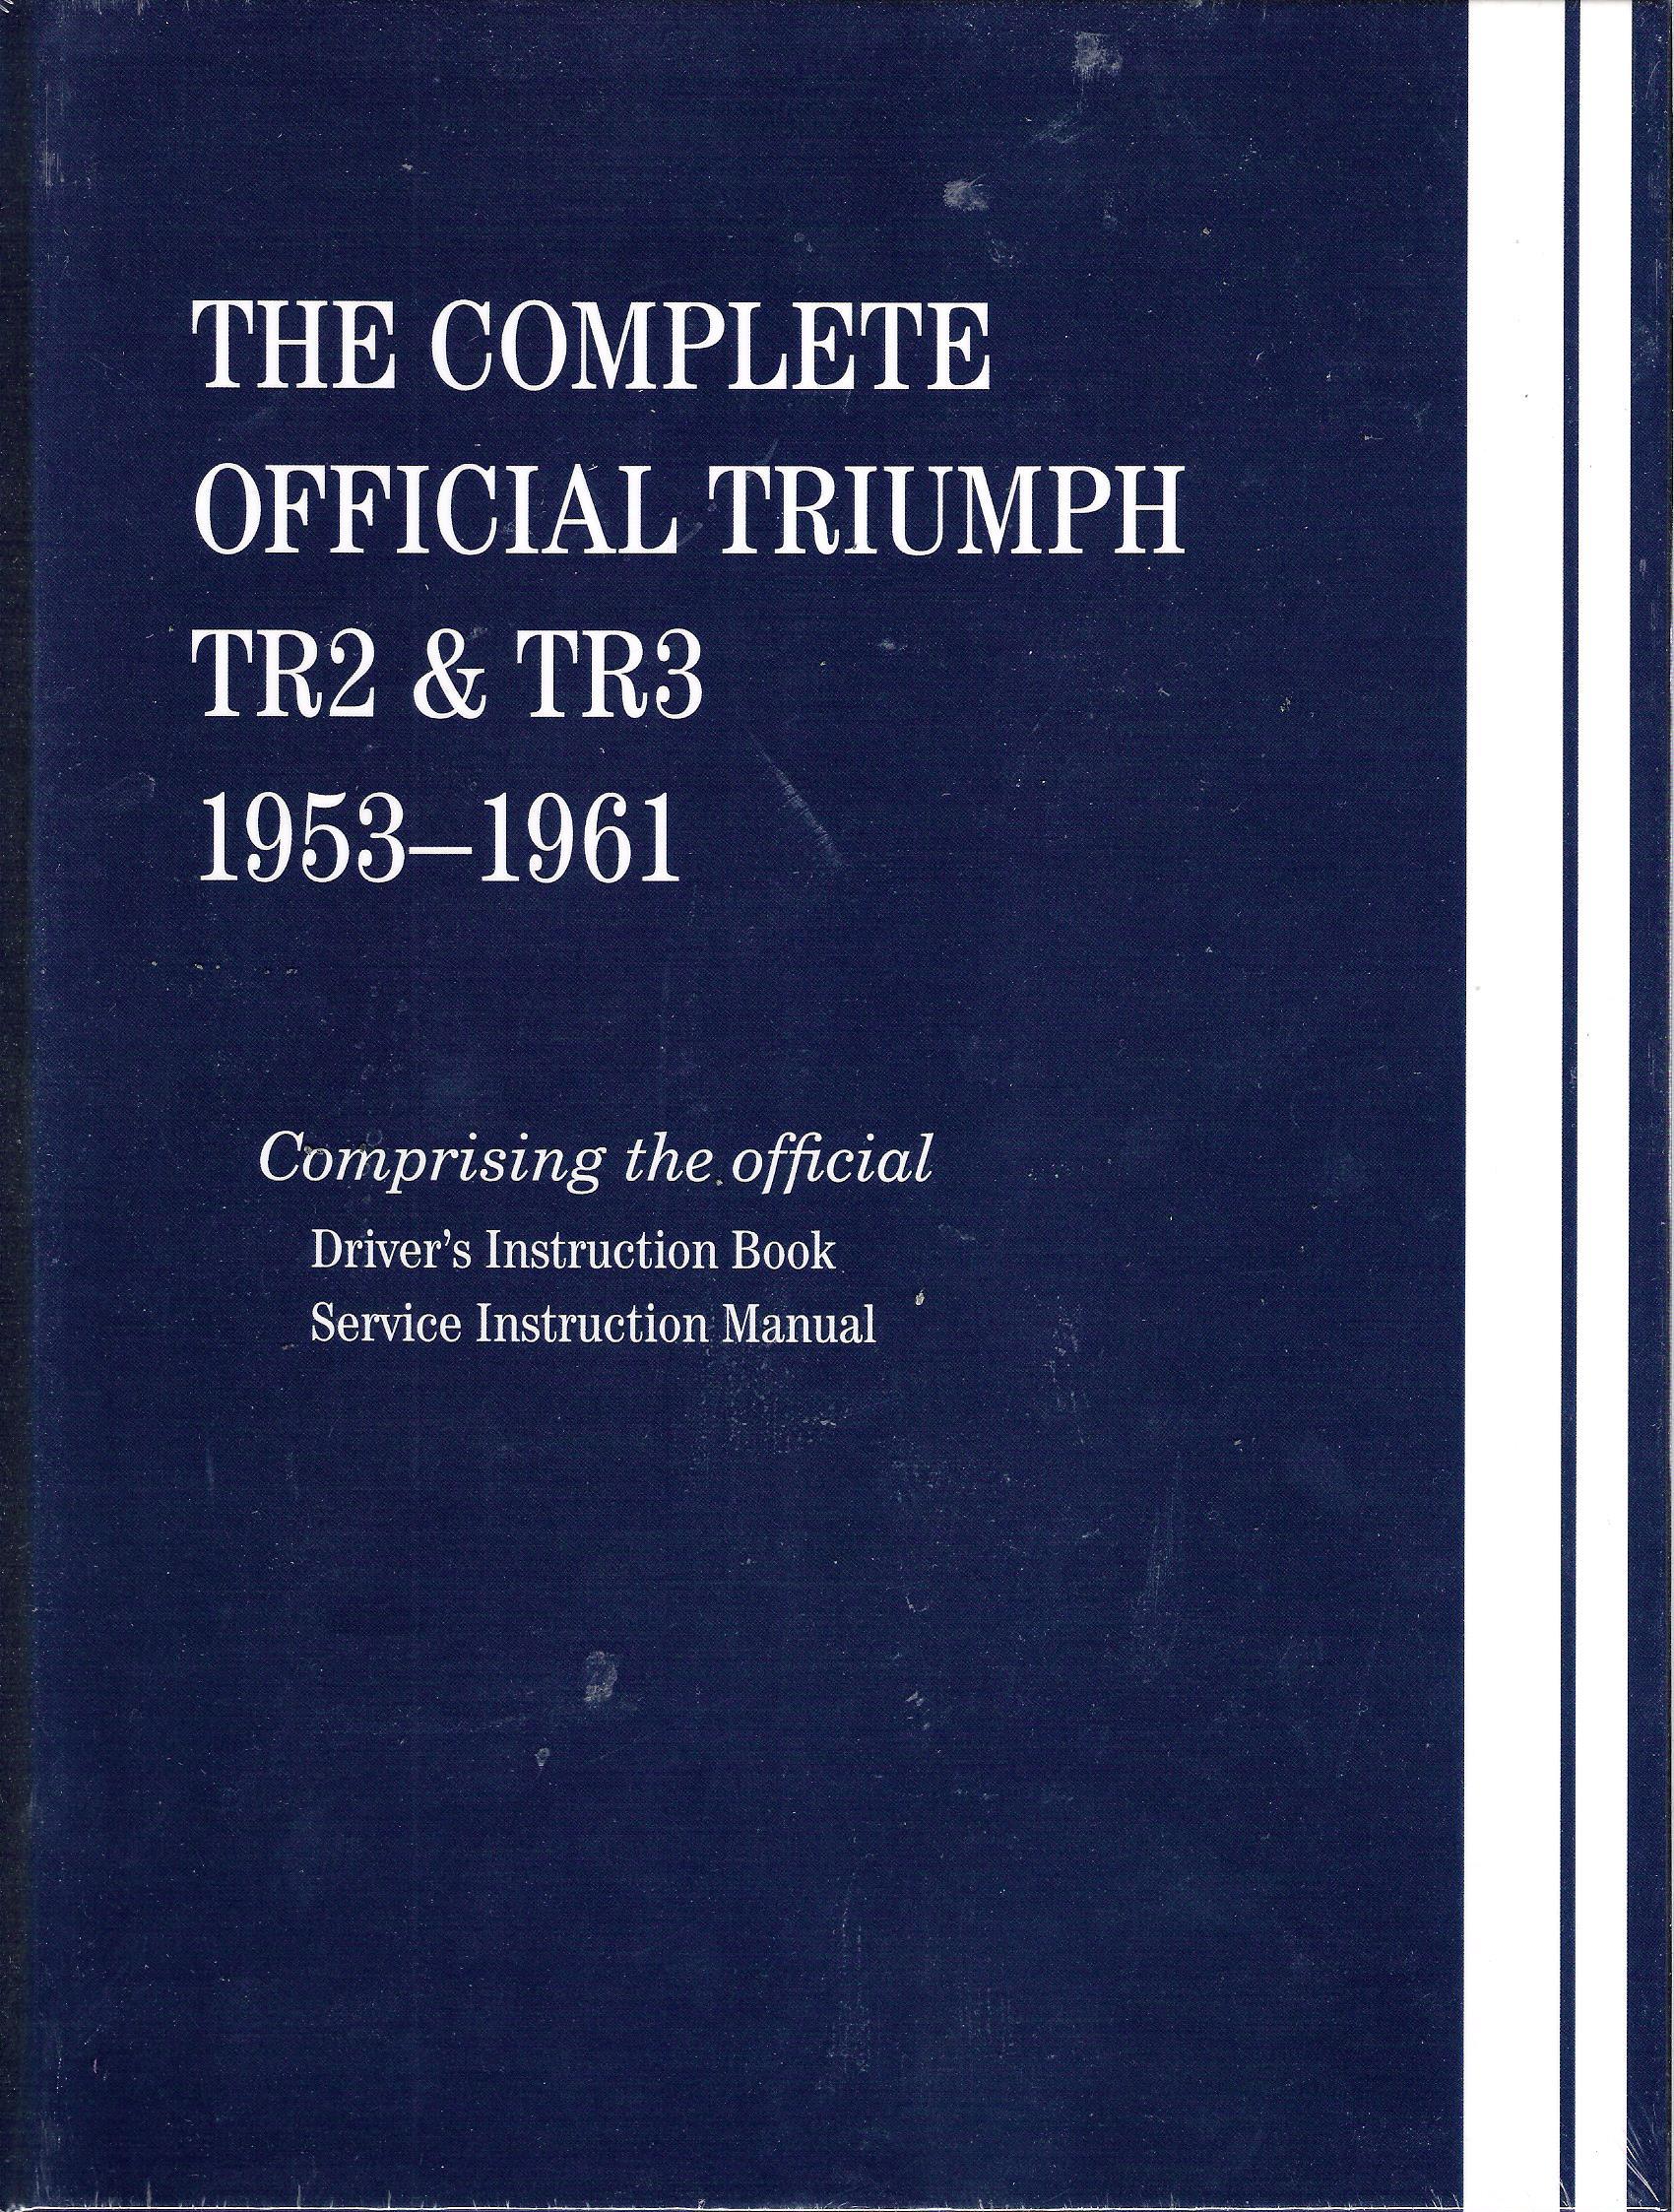 1953-1961 The Complete Official Triumph TR2 TR3 Bentley Factory Service Manual